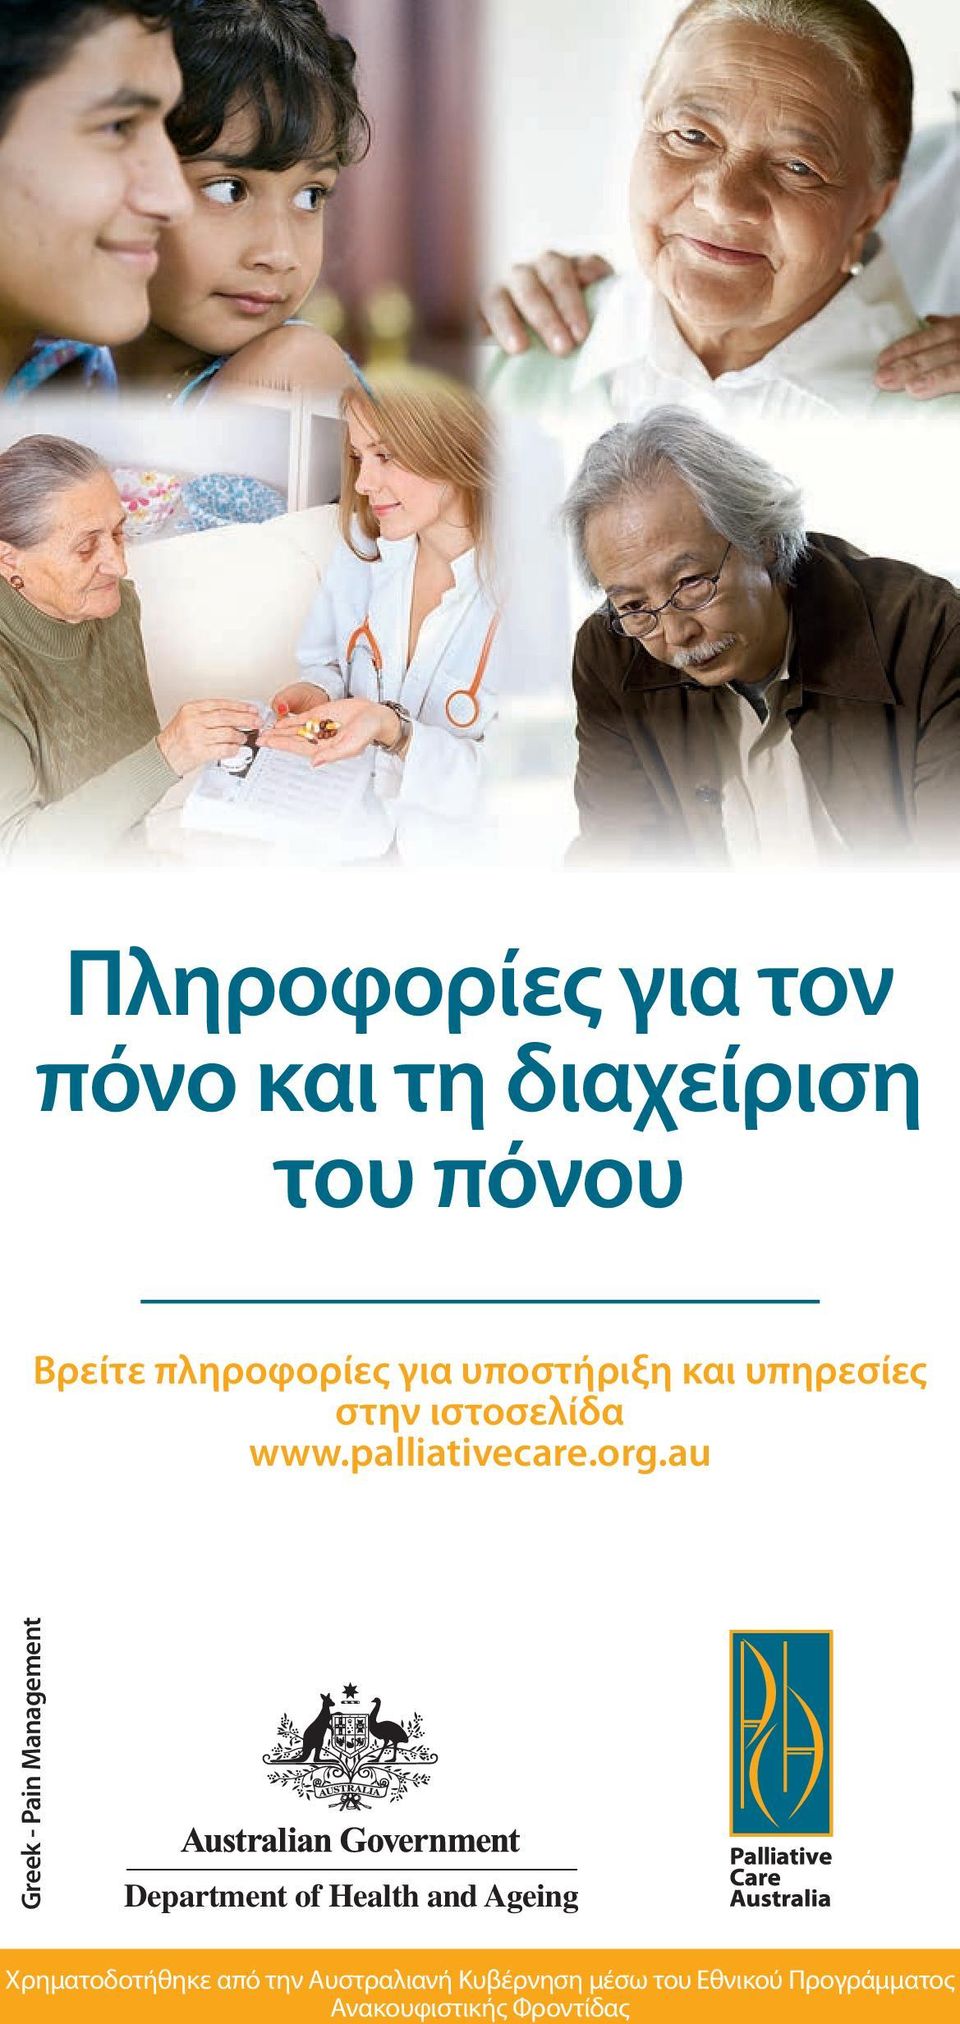 au Greek - Pain Management Department of Health and Ageing Χρηματοδοτήθηκε